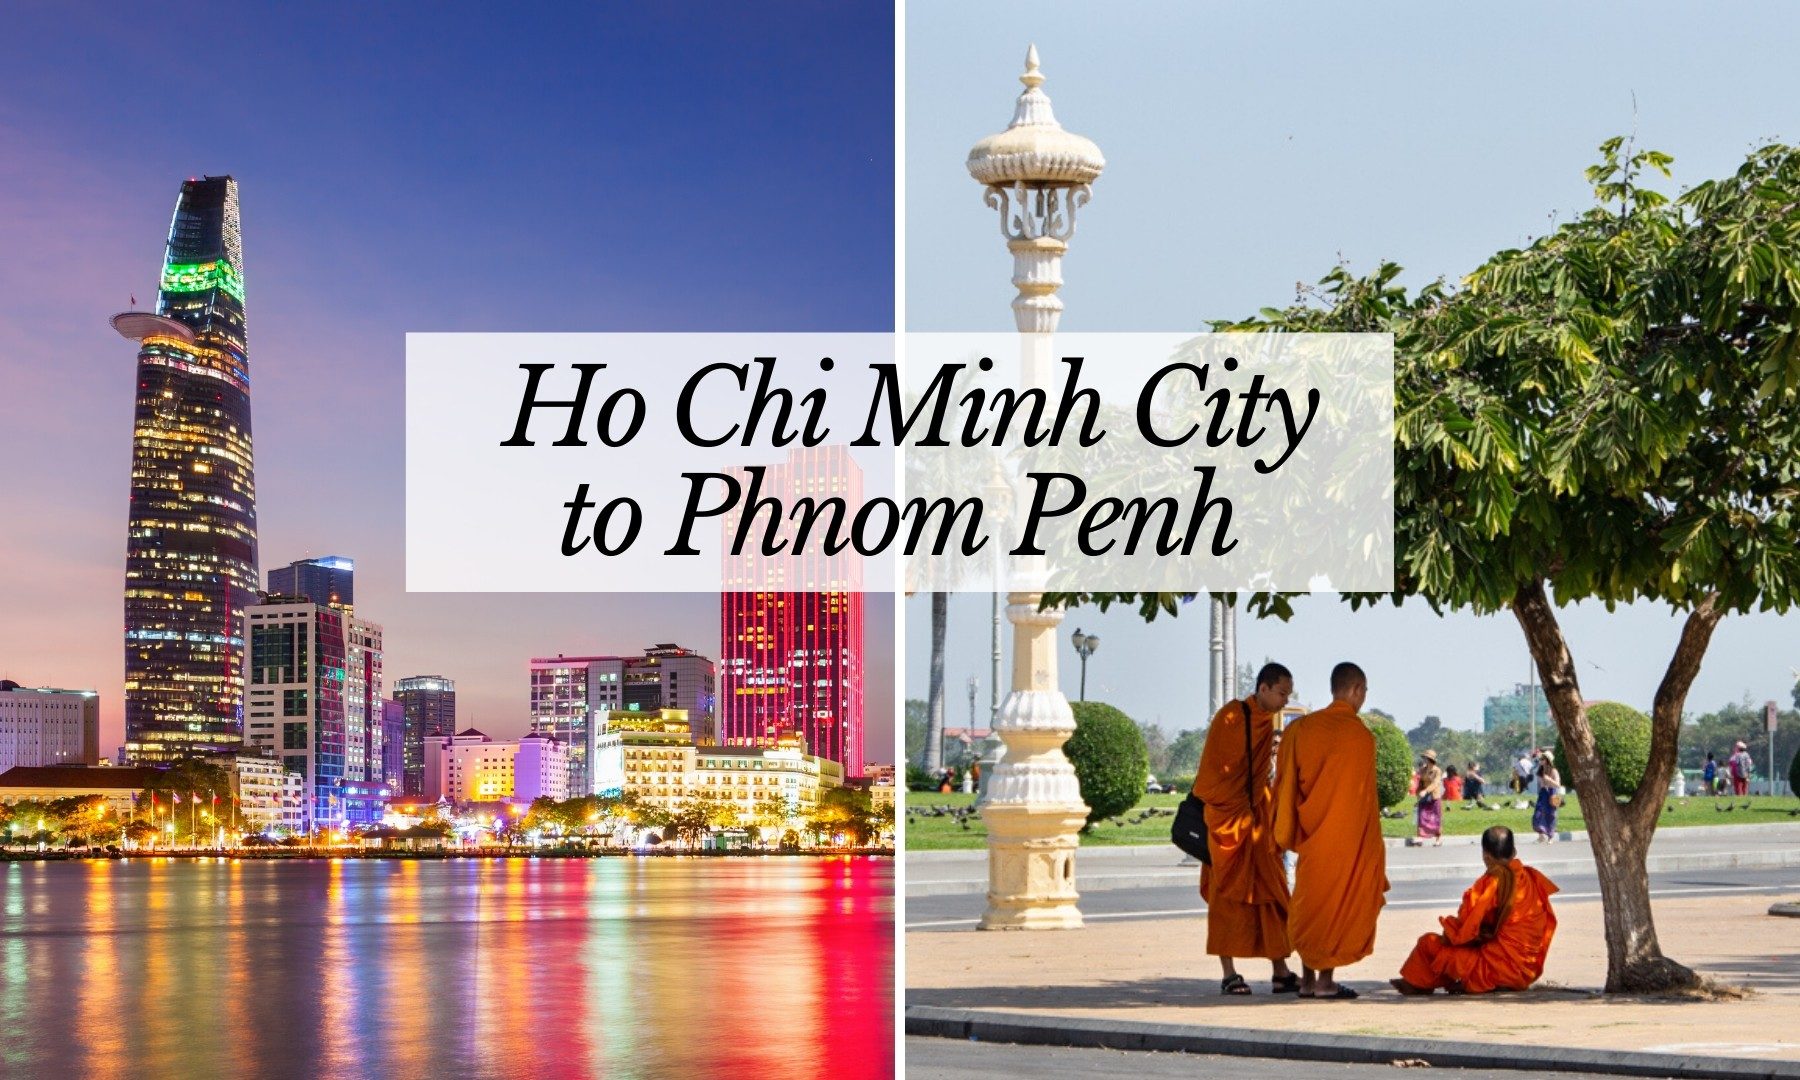 How to Get from Ho Chi Minh City to Phnom Penh